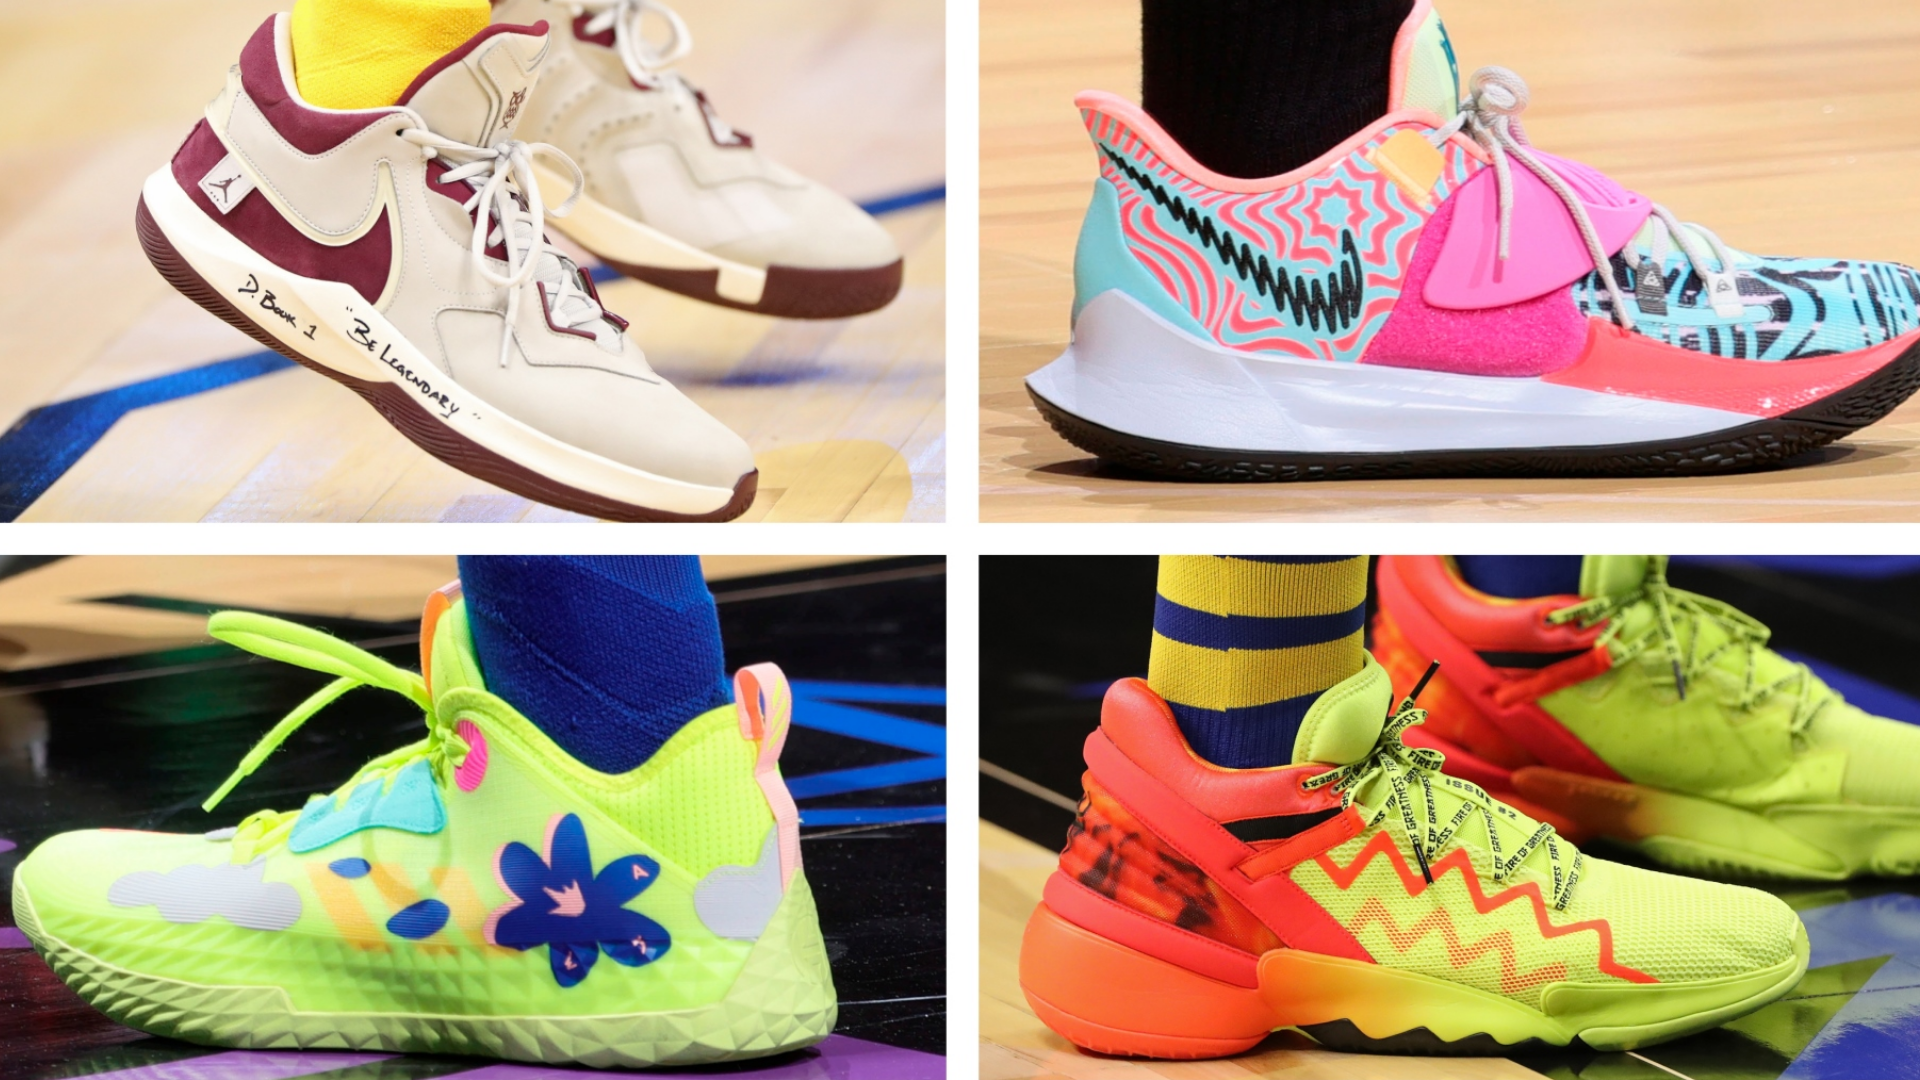 nba all star game shoes